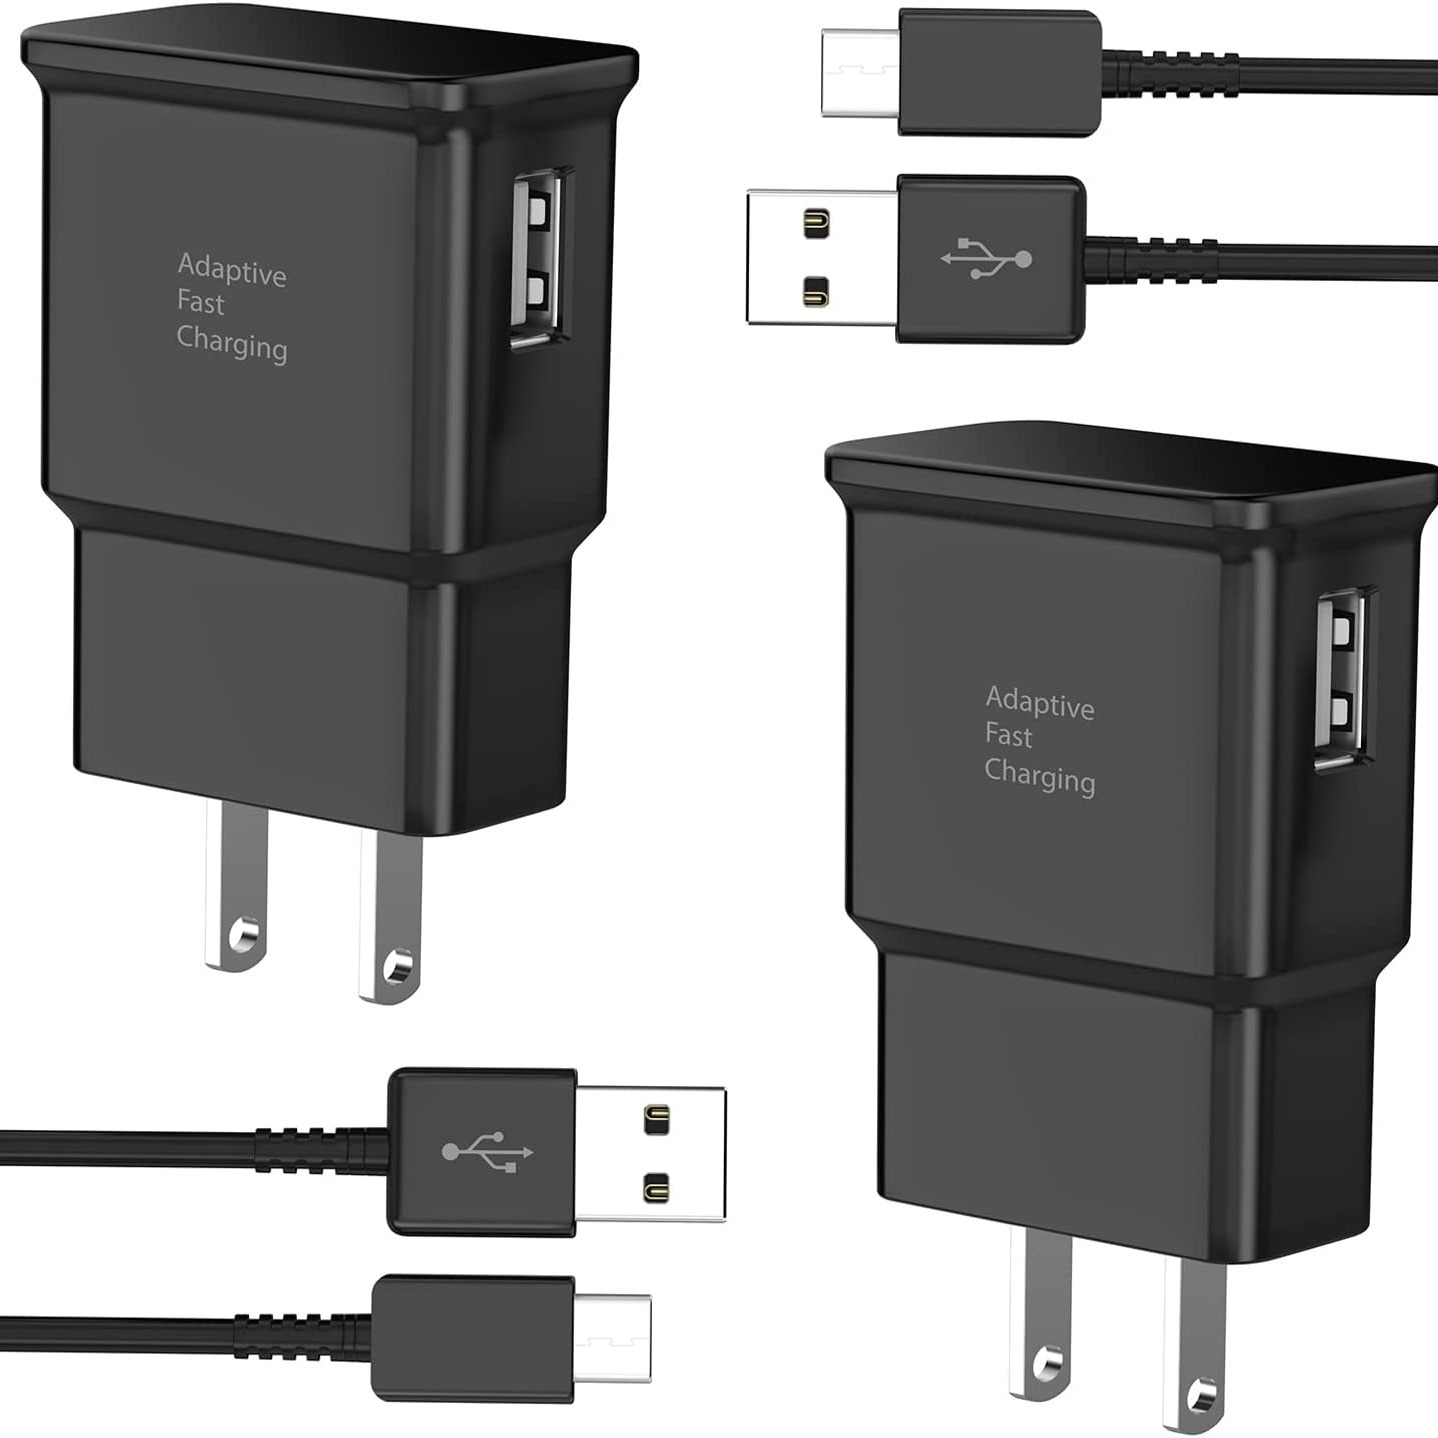 Type C Charger Fast Charging Cord with USB Wall Charger Block for Samsung  Galaxy S9/S9 Plus/S10/S10e/S10 Plus/S8/S8 Plus/Note 20/Note 10/Note 9/Note